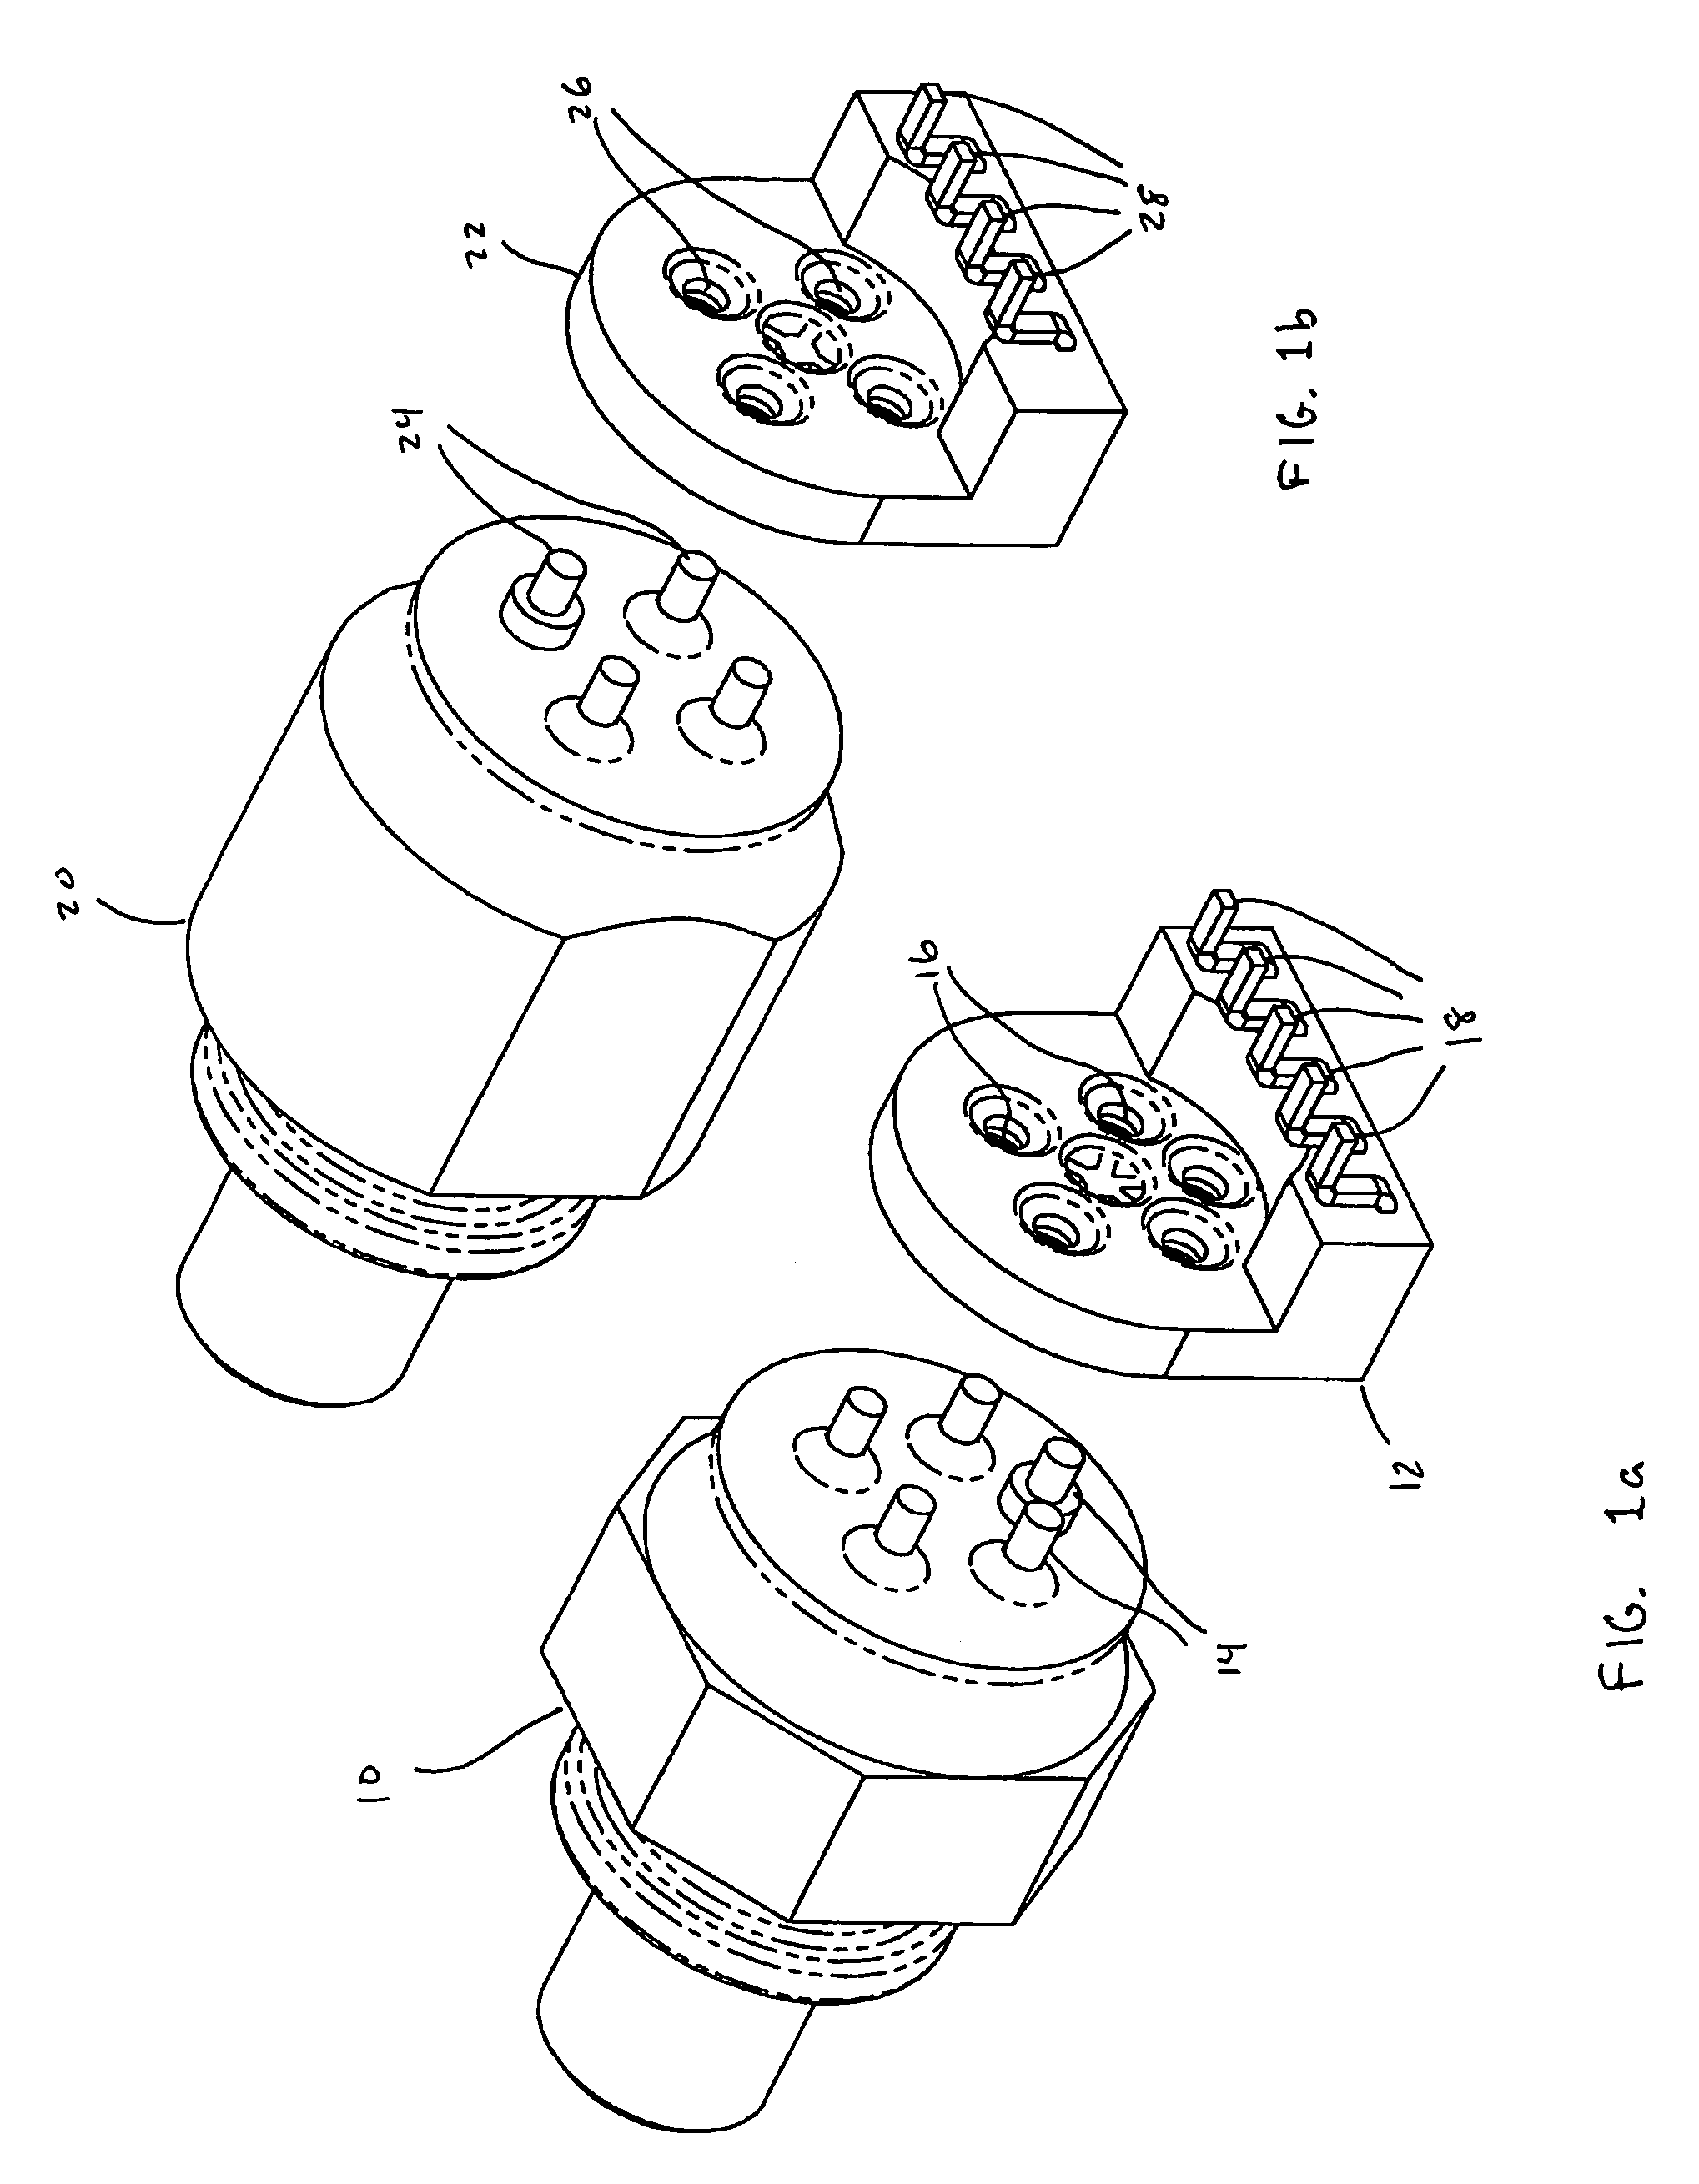 Lead frame for connecting optical sub-assembly to printed circuit board